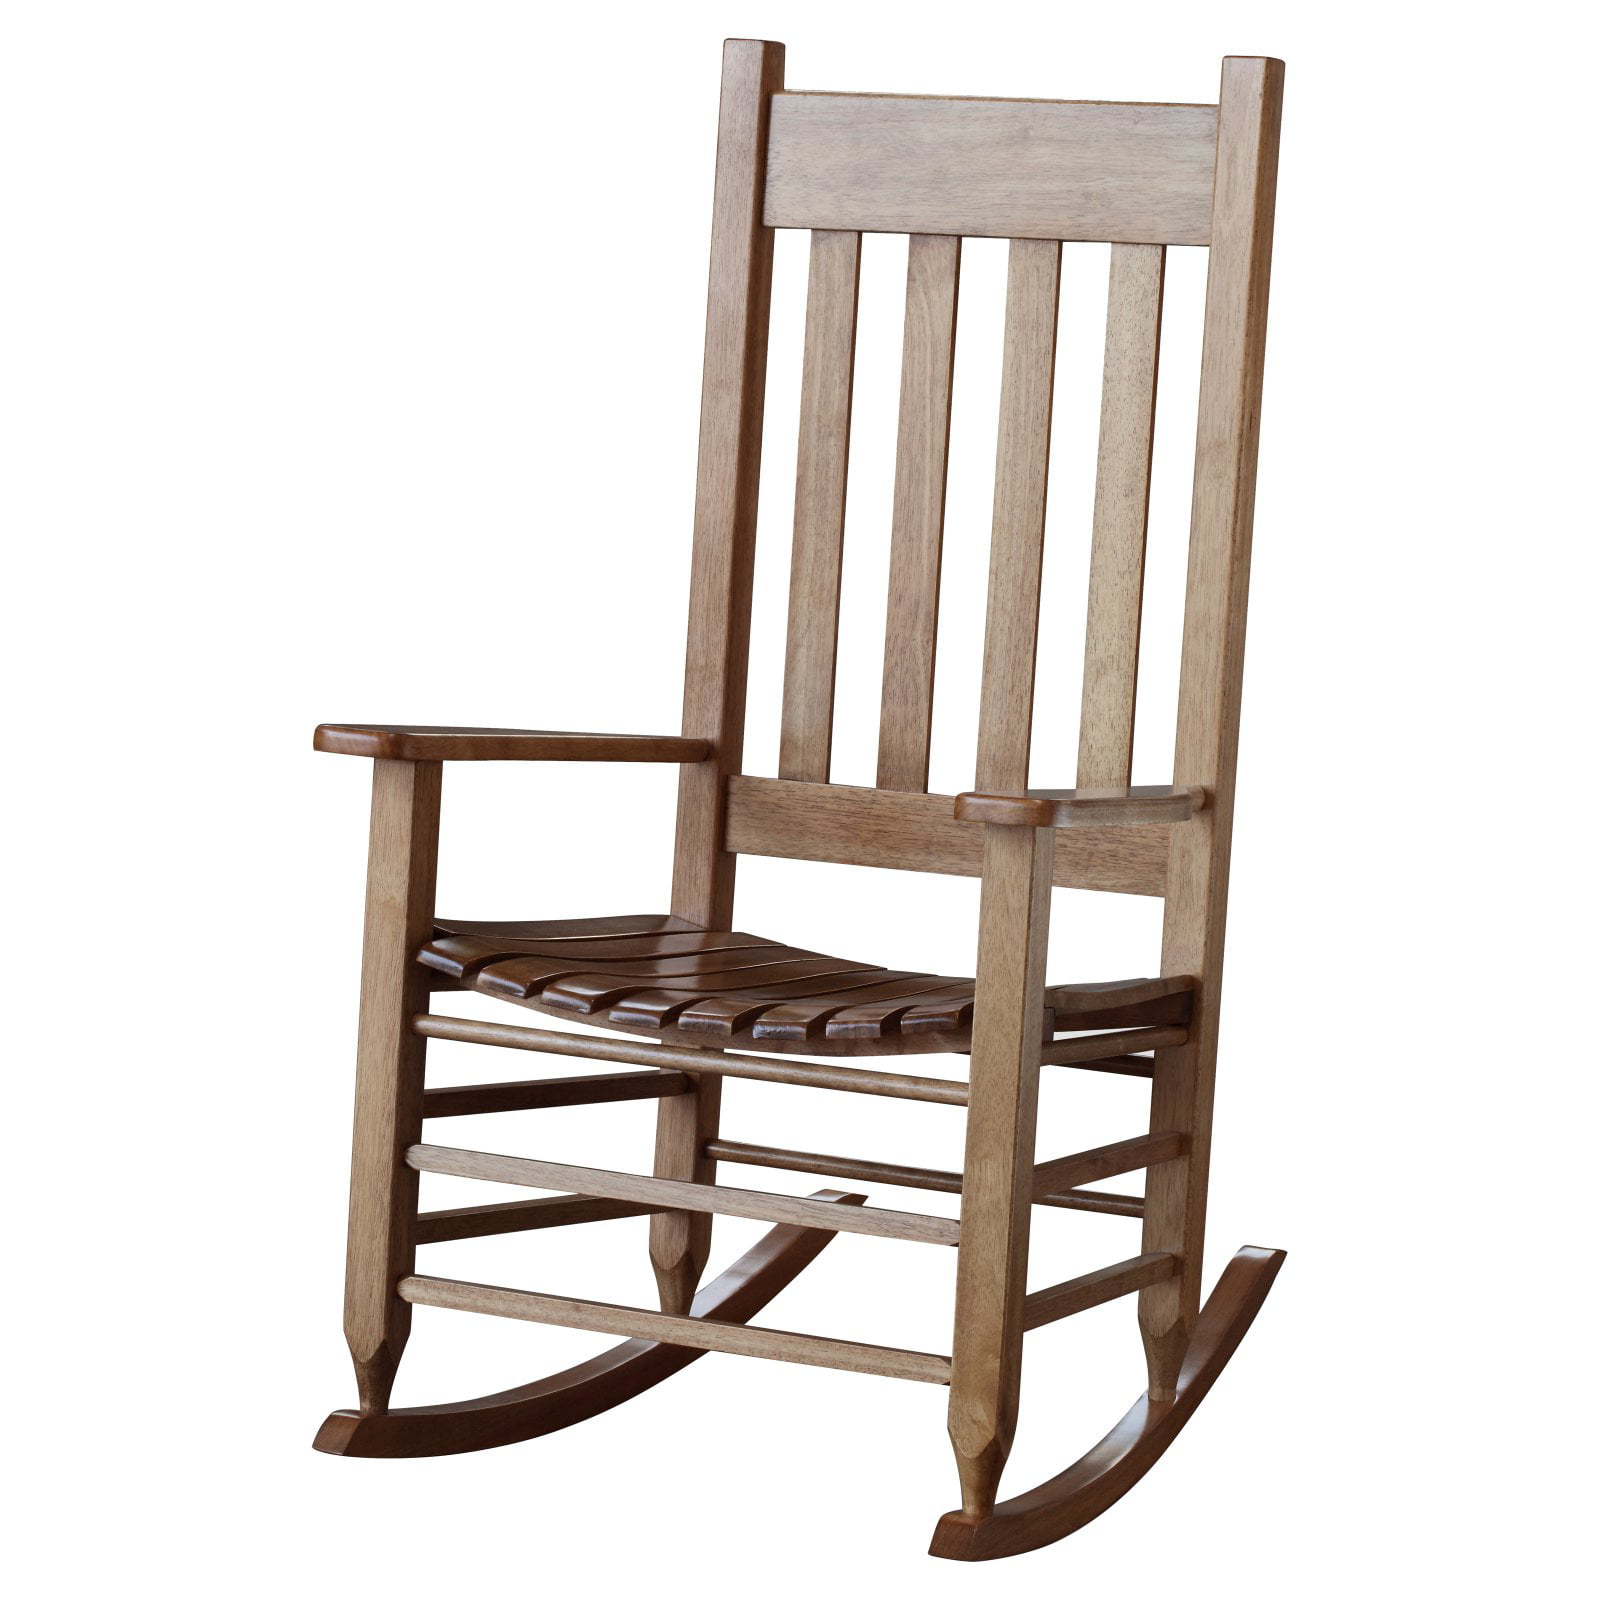 Featured image of post Outdoor Rocking Chair Walmart - He describes it as a rocking chair you can take anywhere.